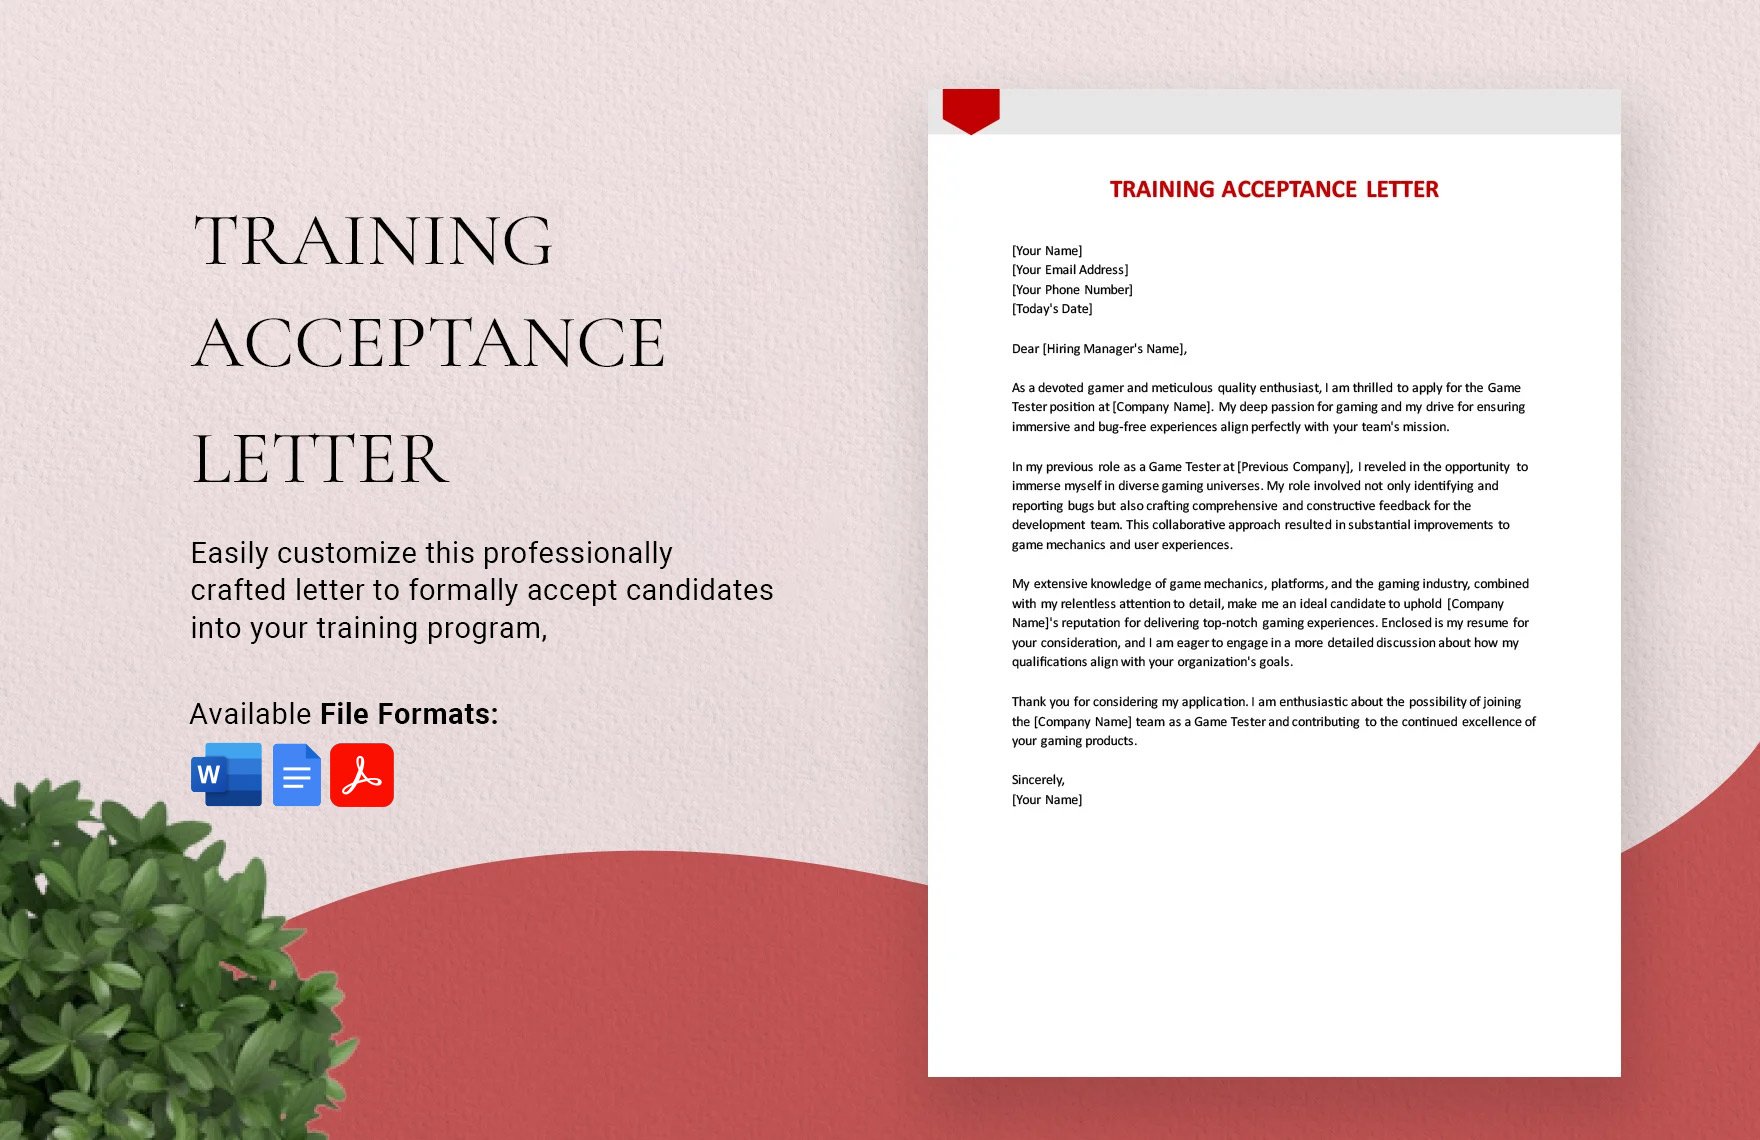 Training Acceptance Letter in Word, Google Docs, PDF